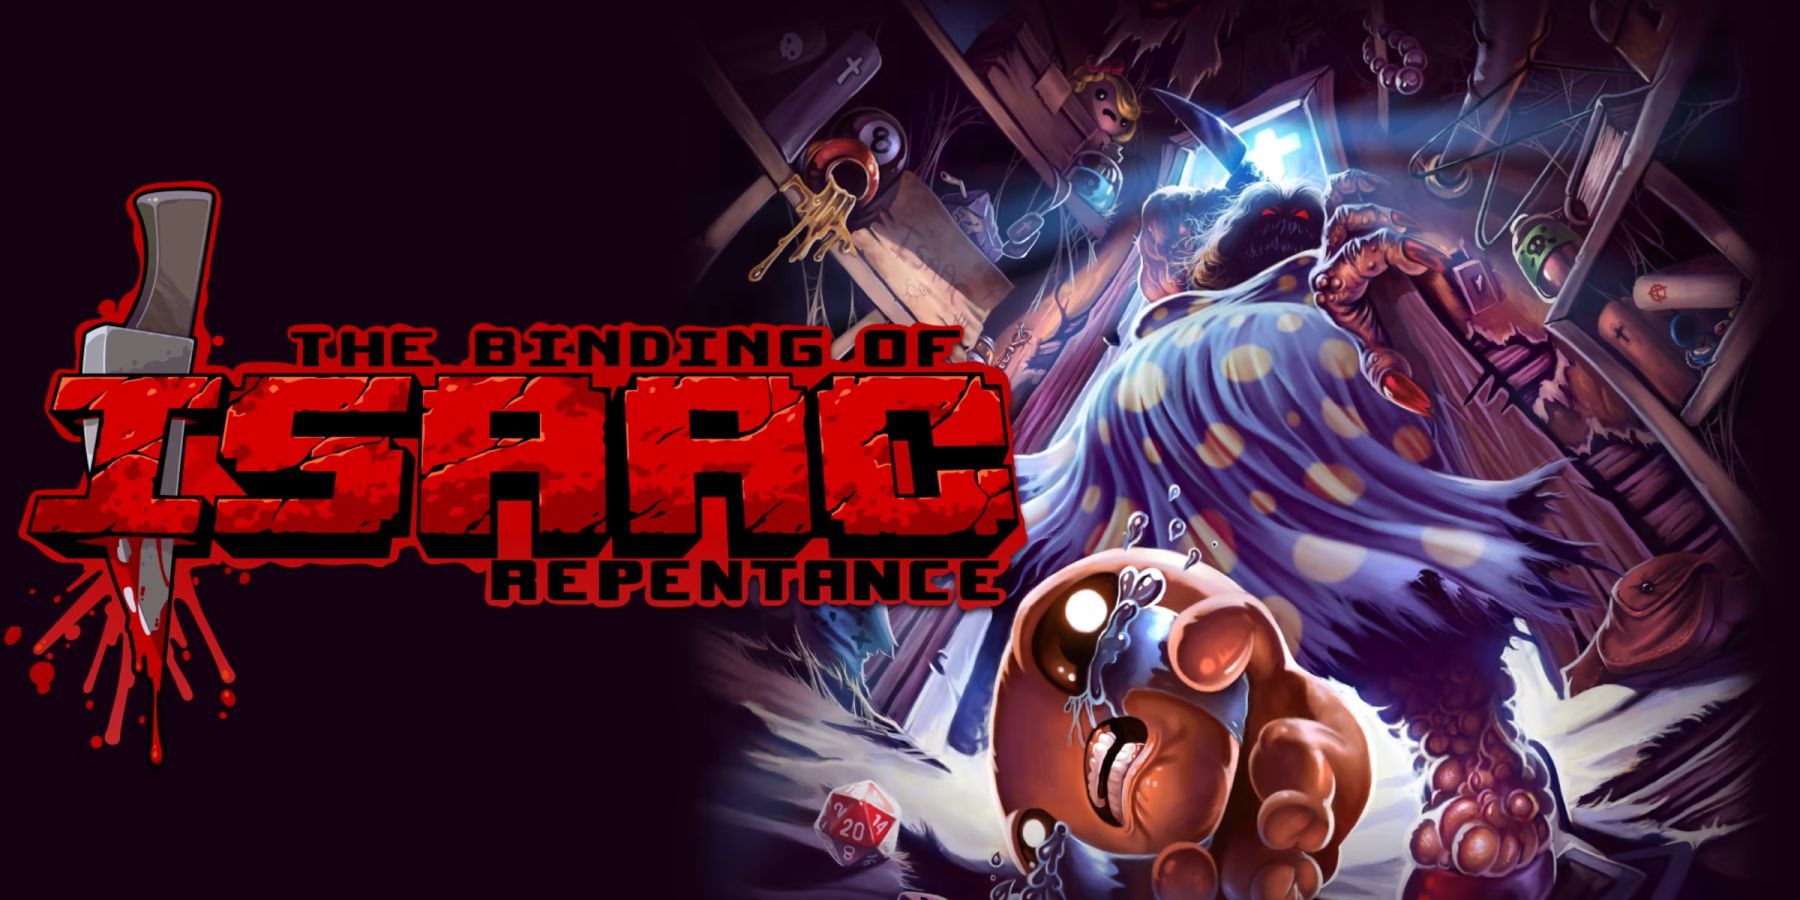 The key visual for The Binding of Isaac: Repentance. The image displays protagonist Isaac against grotesque visuals from the game.